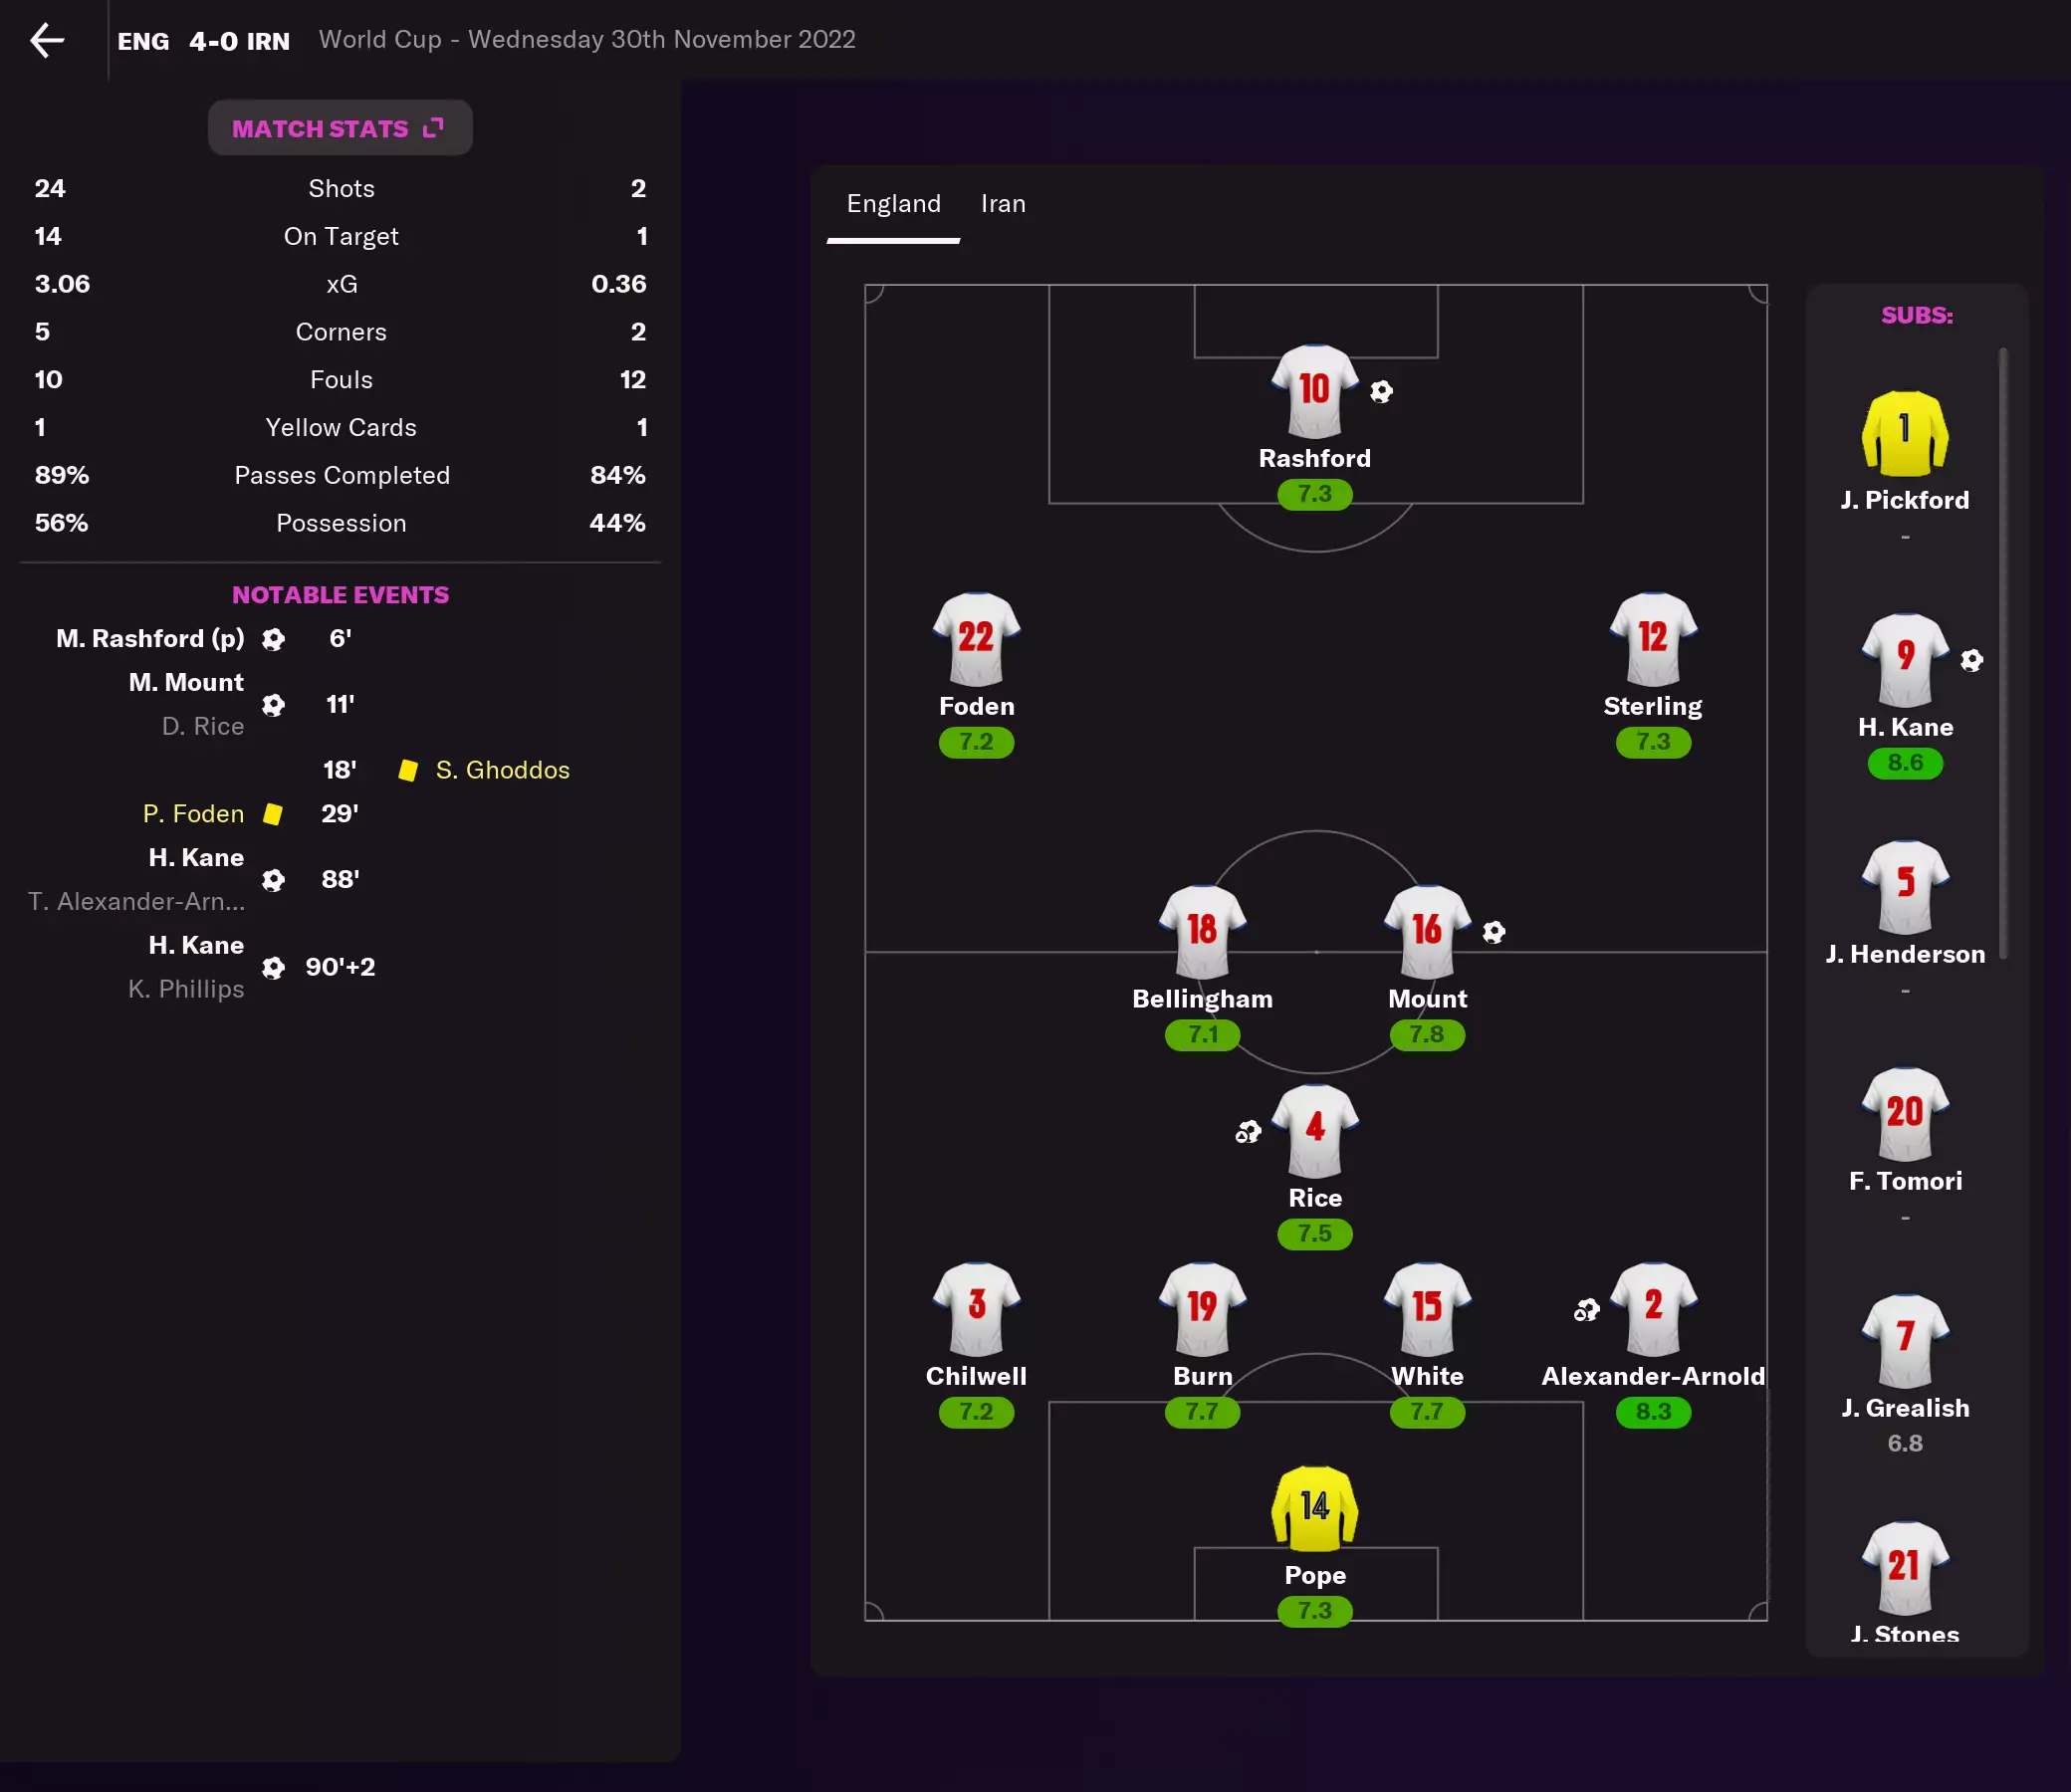 England cruise to a 4-0 win against Iran and go top of Group C. Image credit: Football Manager 2022